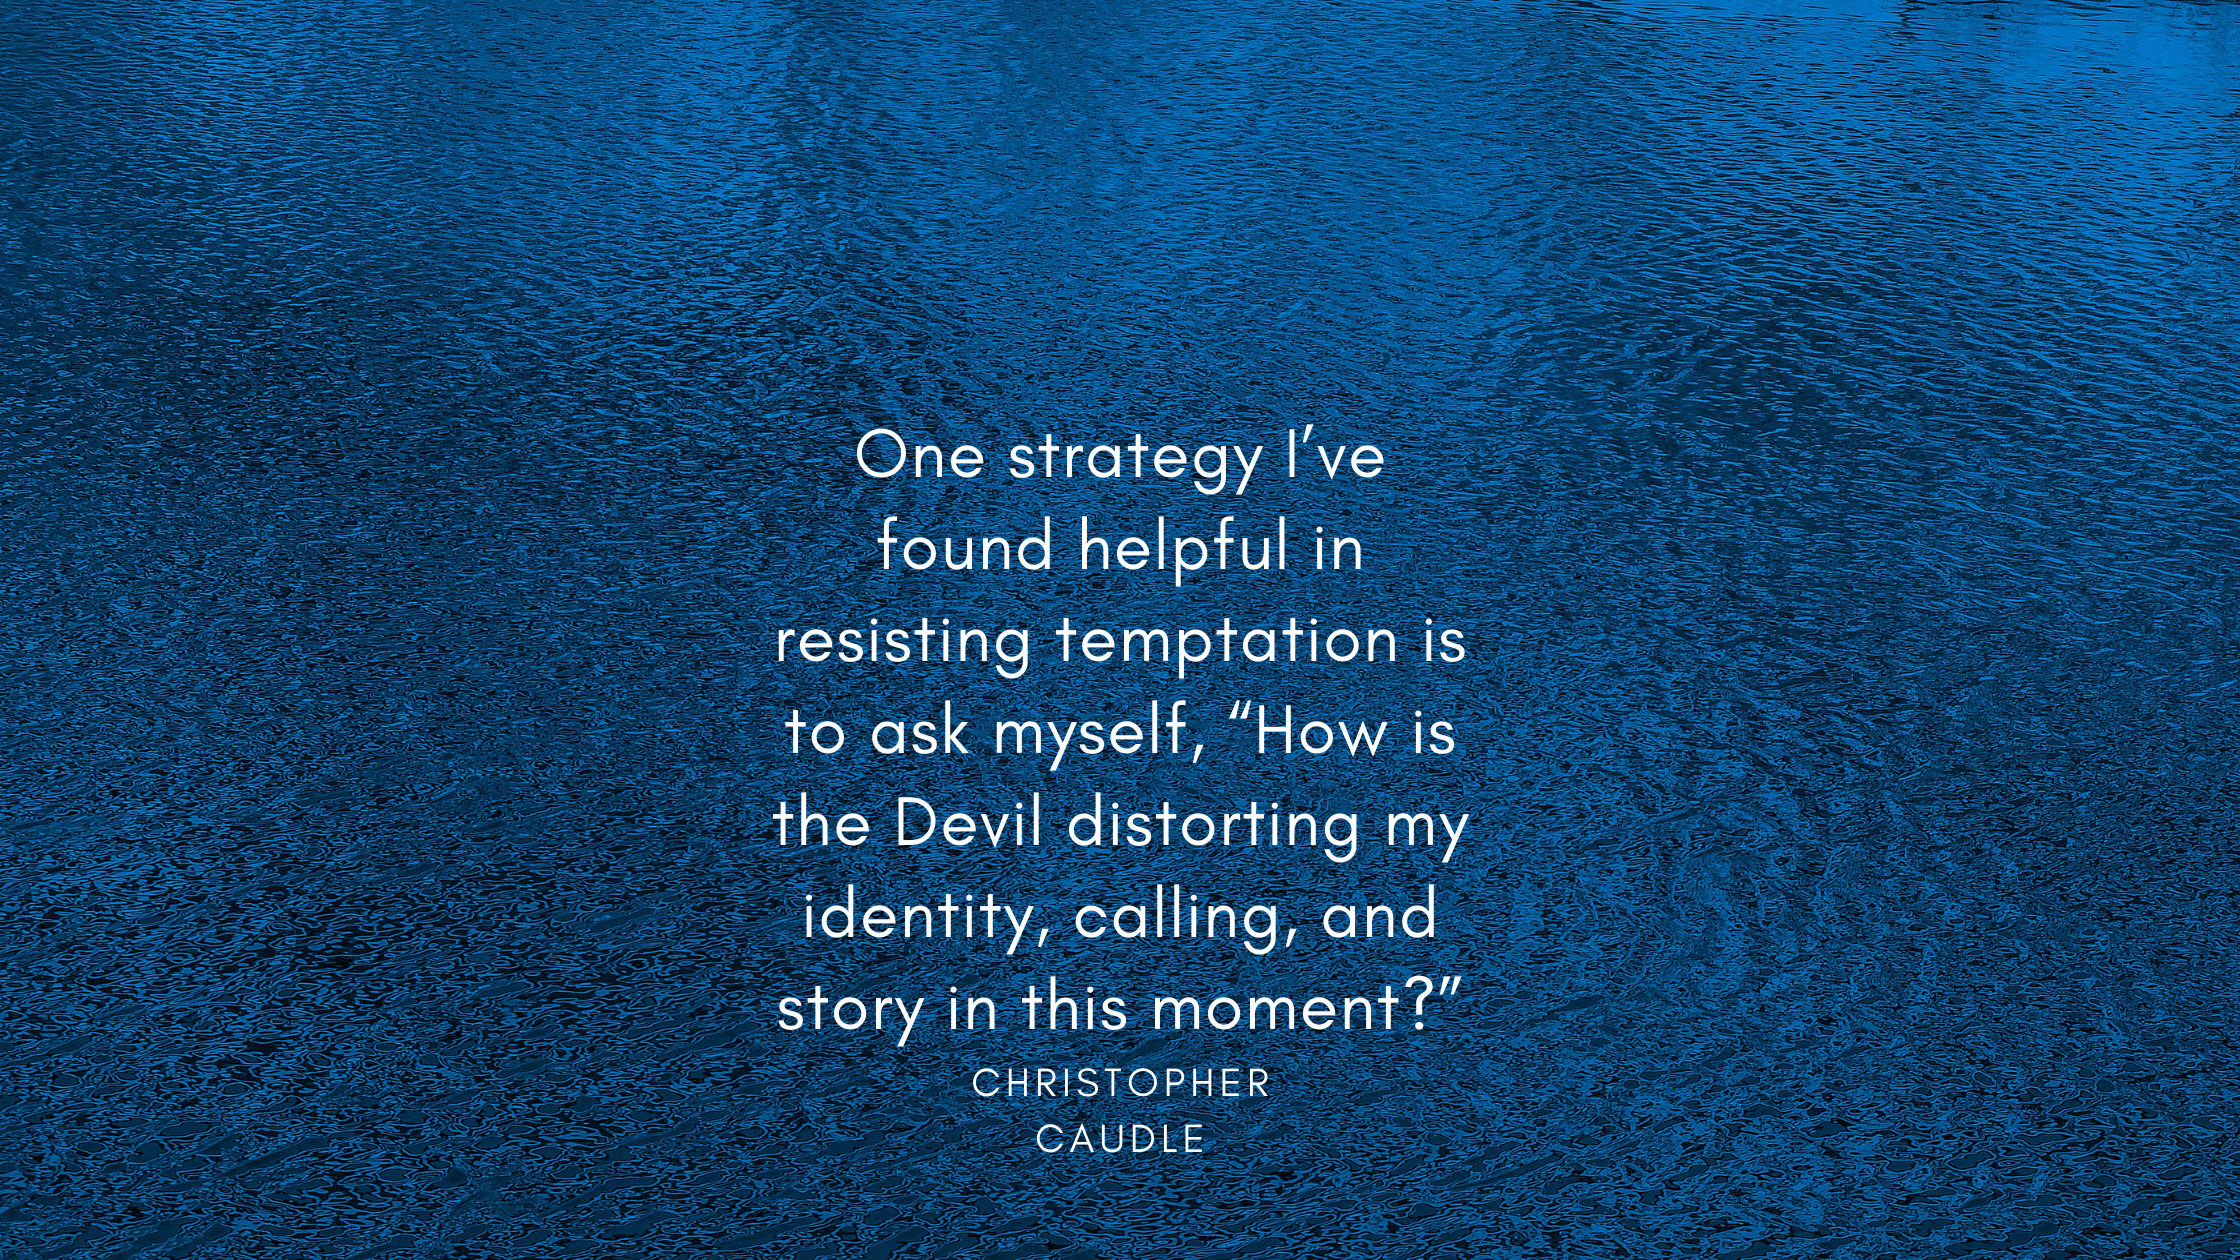 One strategy I’ve found helpful in resisting temptation is to ask myself, “How is the Devil distorting my identity, calling, and story in this moment?